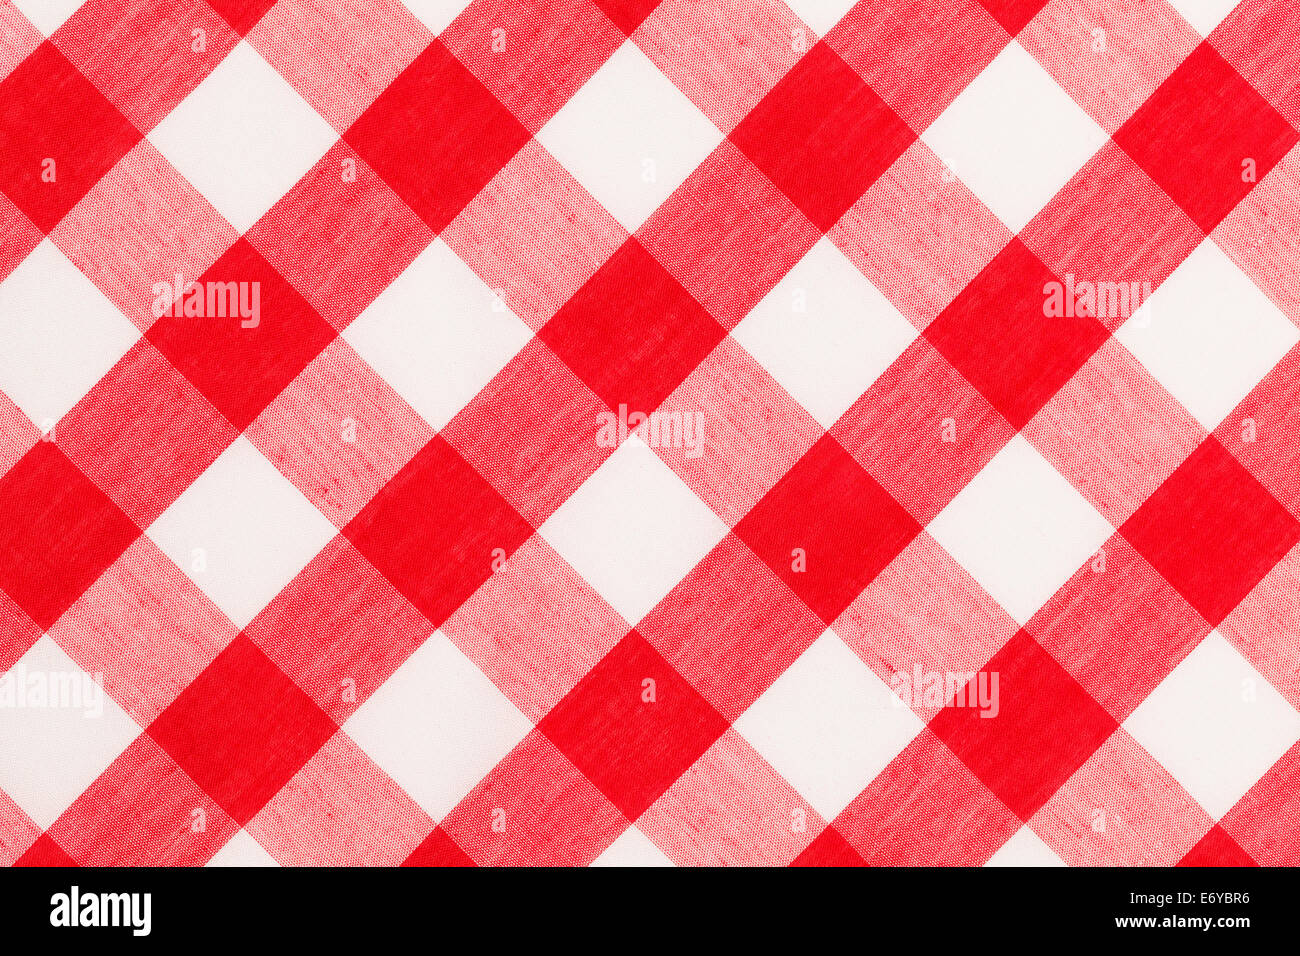 Large Red and White Checkered Table Cloth Background. Stock Photo